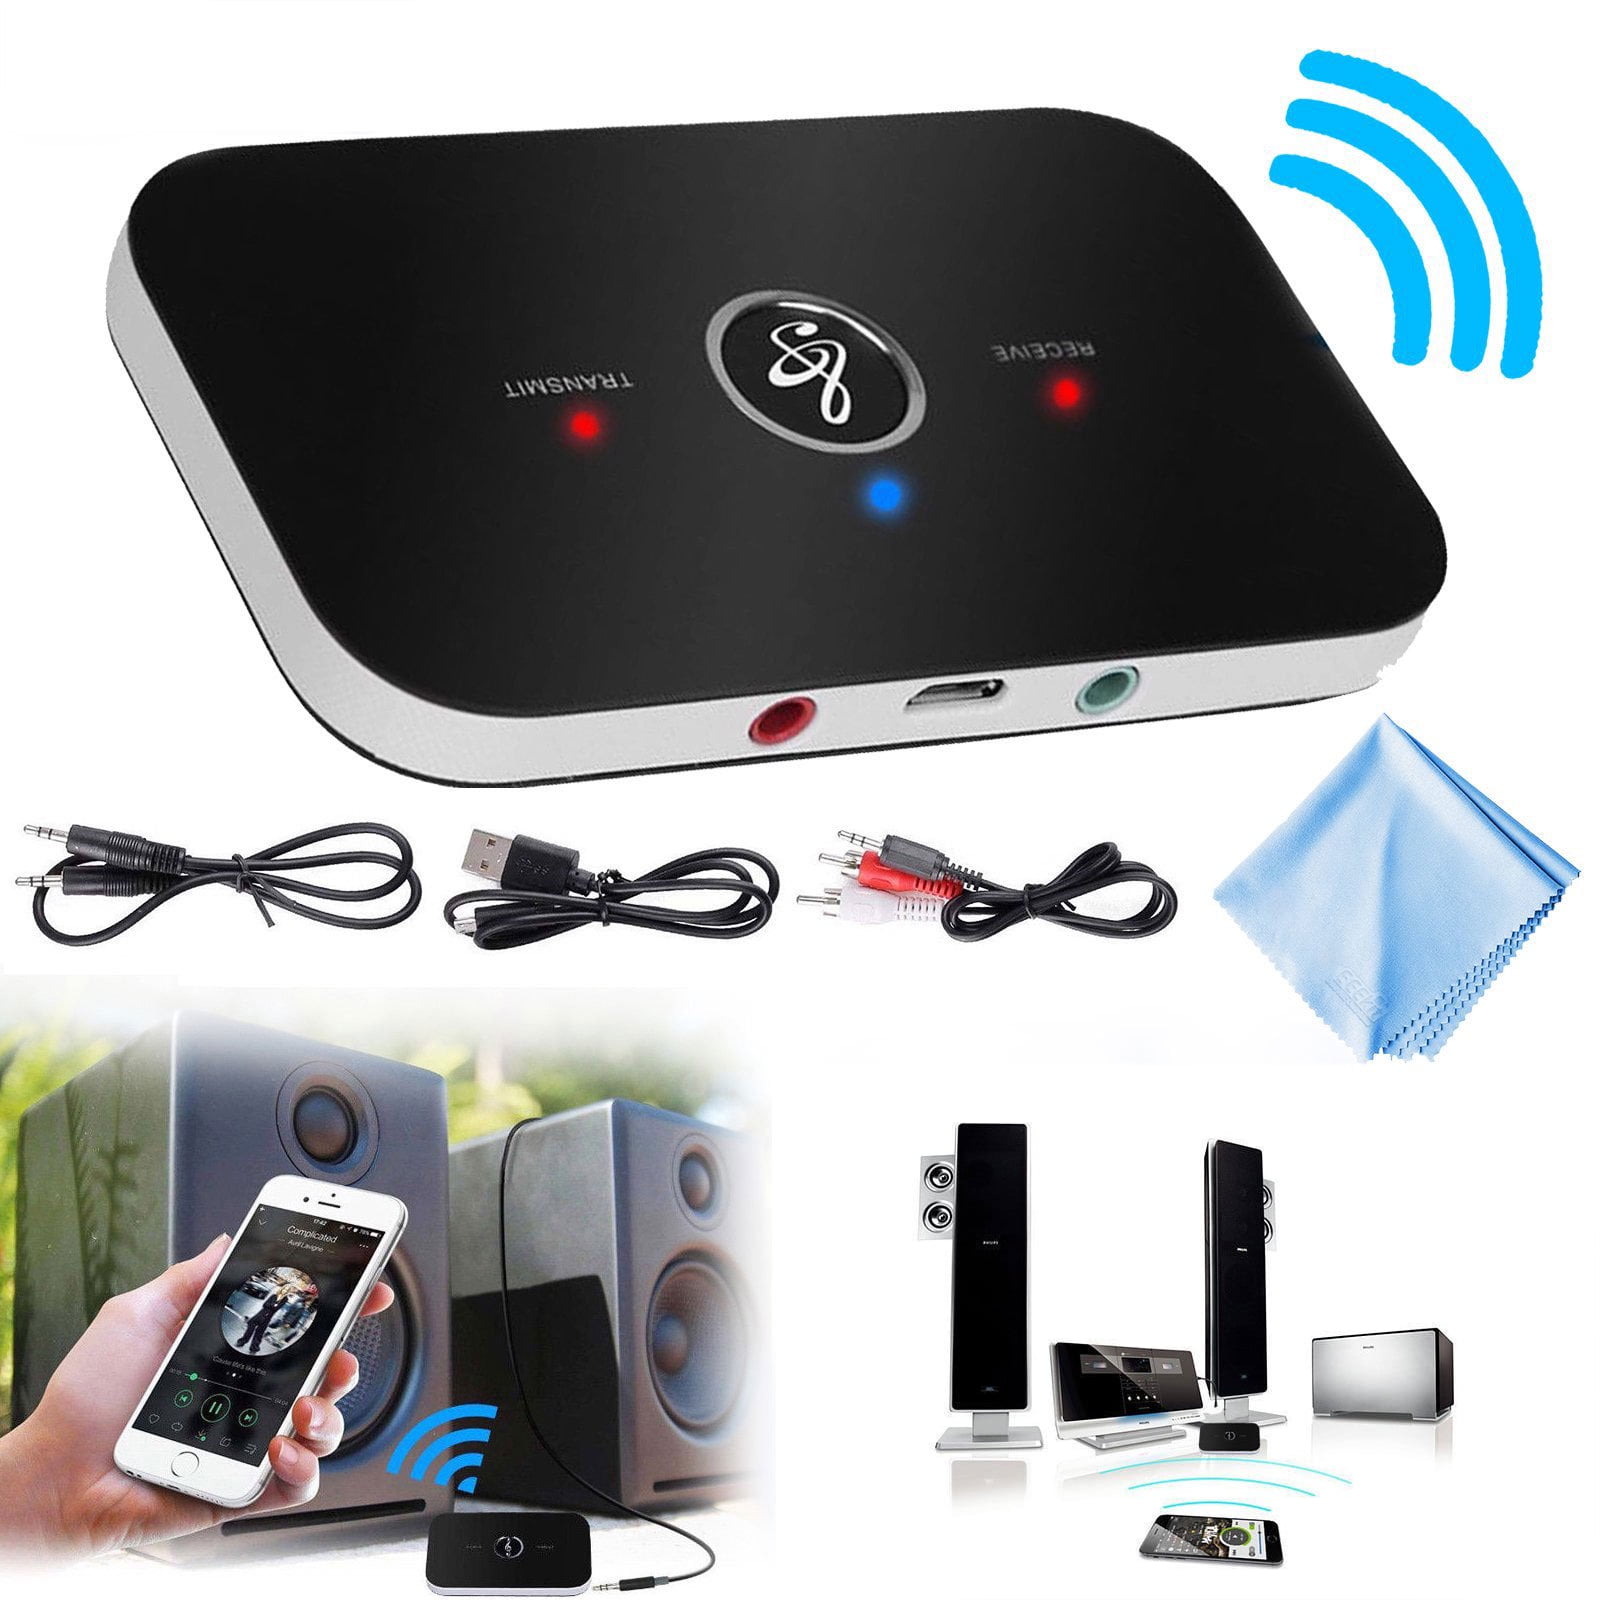 Wireless Bluetooth Transmitter Stereo Audio Music Adapter for TV Phone PC Hot 